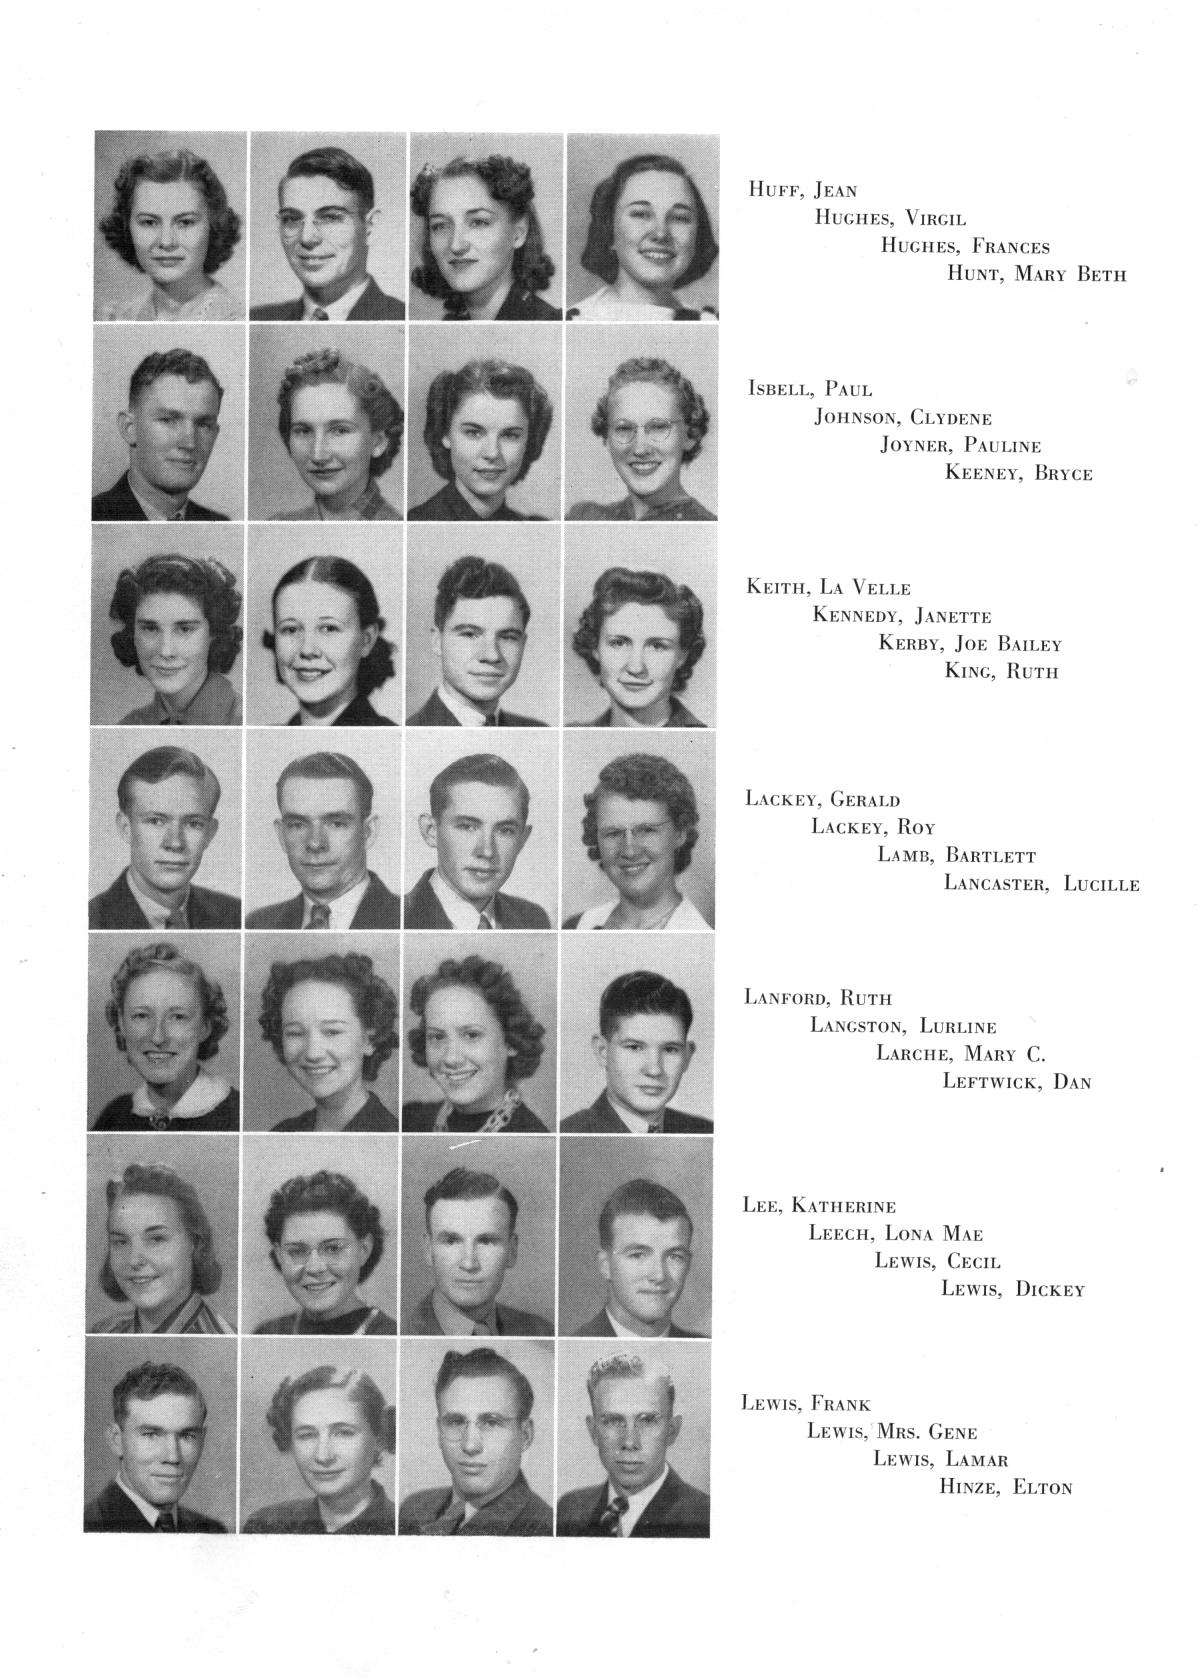 The Lasso, Yearbook of Howard Payne College, 1940
                                                
                                                    62
                                                